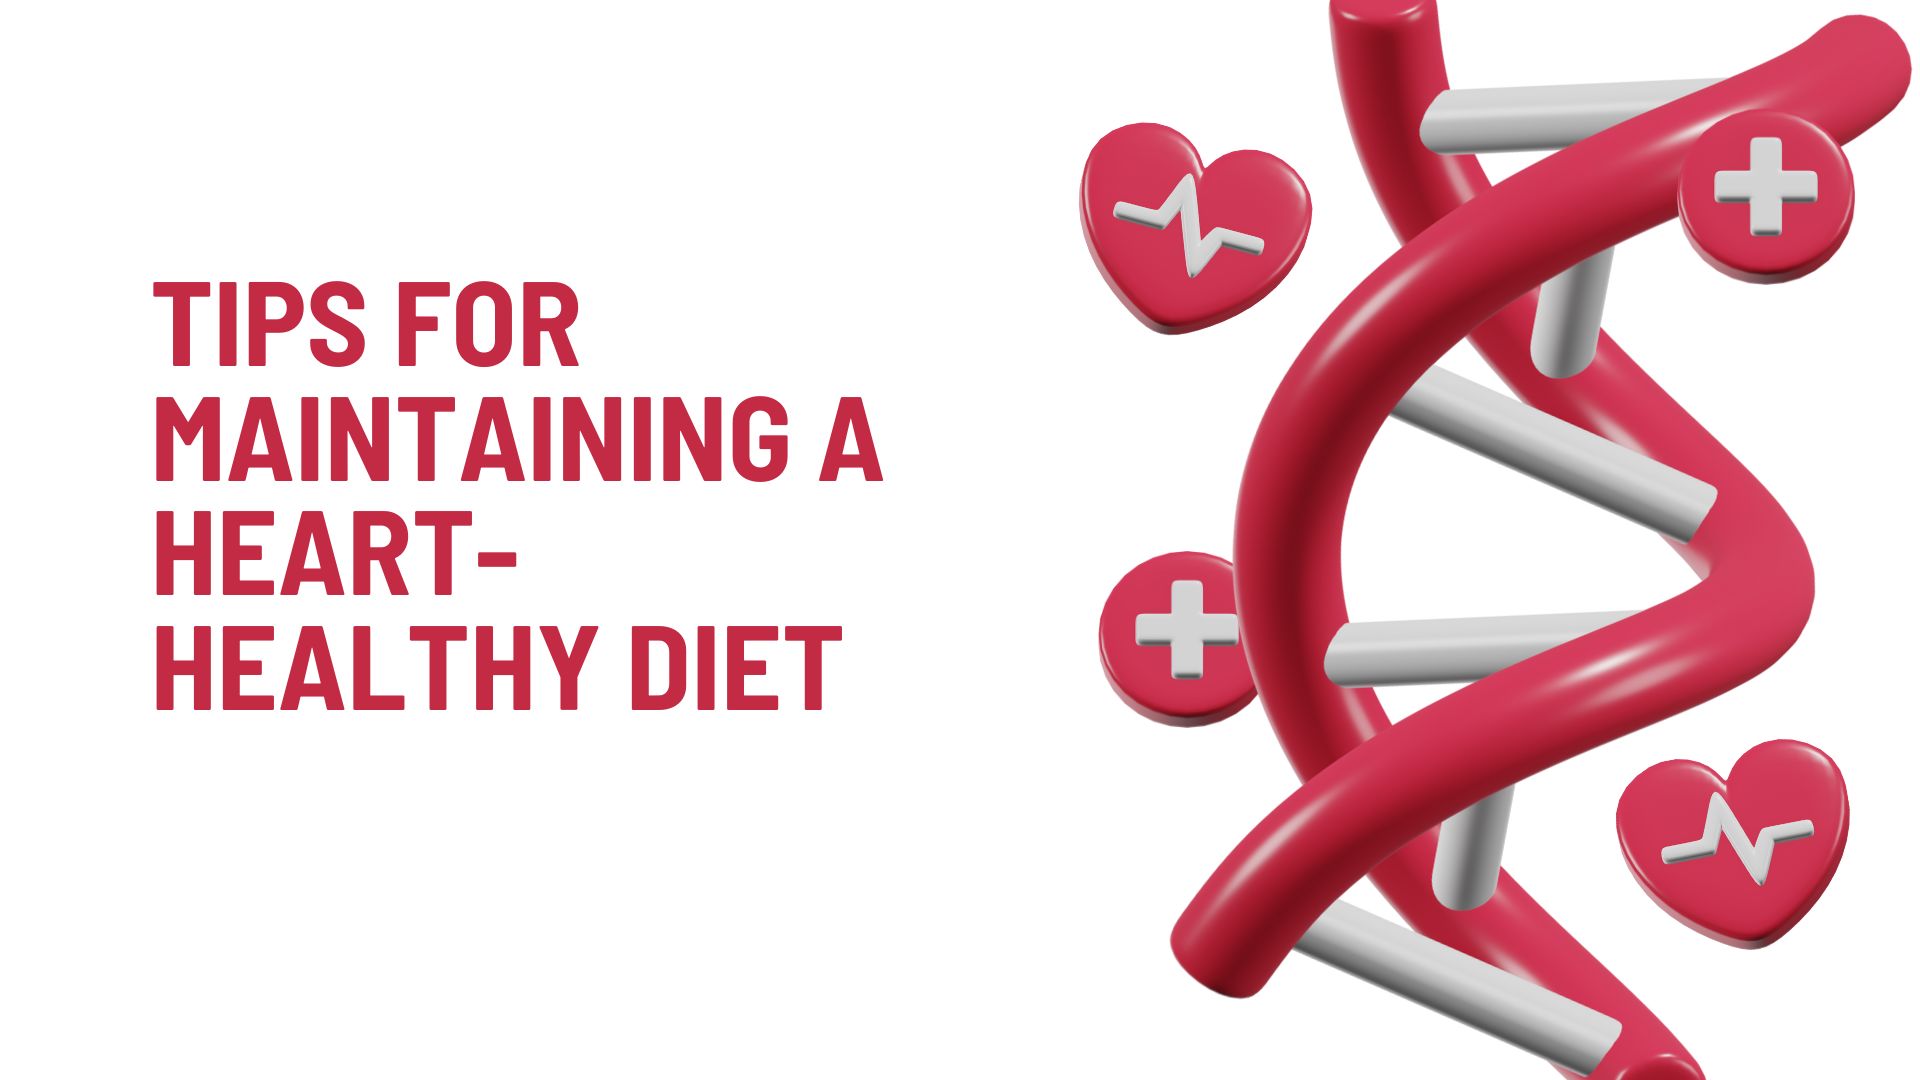 Tips for Maintaining a Heart-Healthy Diet